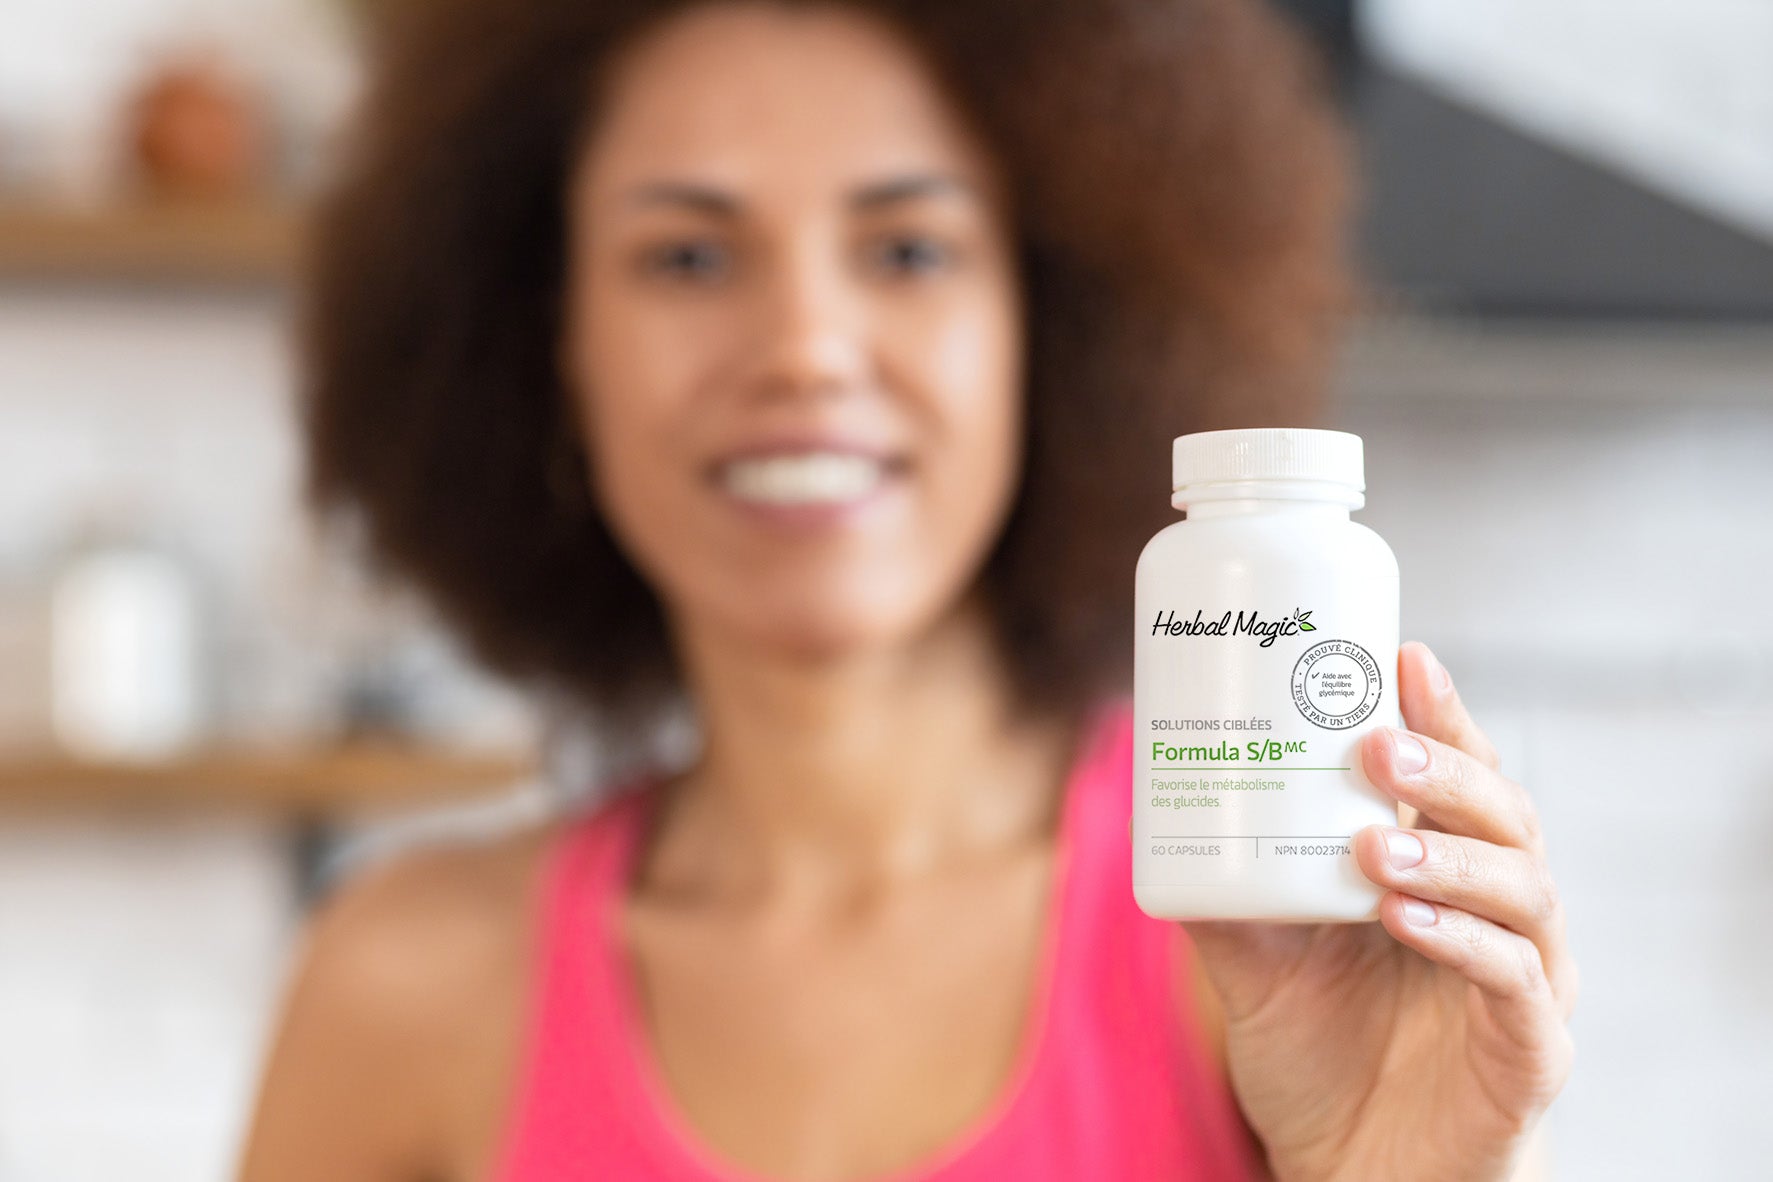 Herbal Magic's Formula S/B Is A Super Effective Metabolism Booster! Learn why in our recent Wellness Artcile.